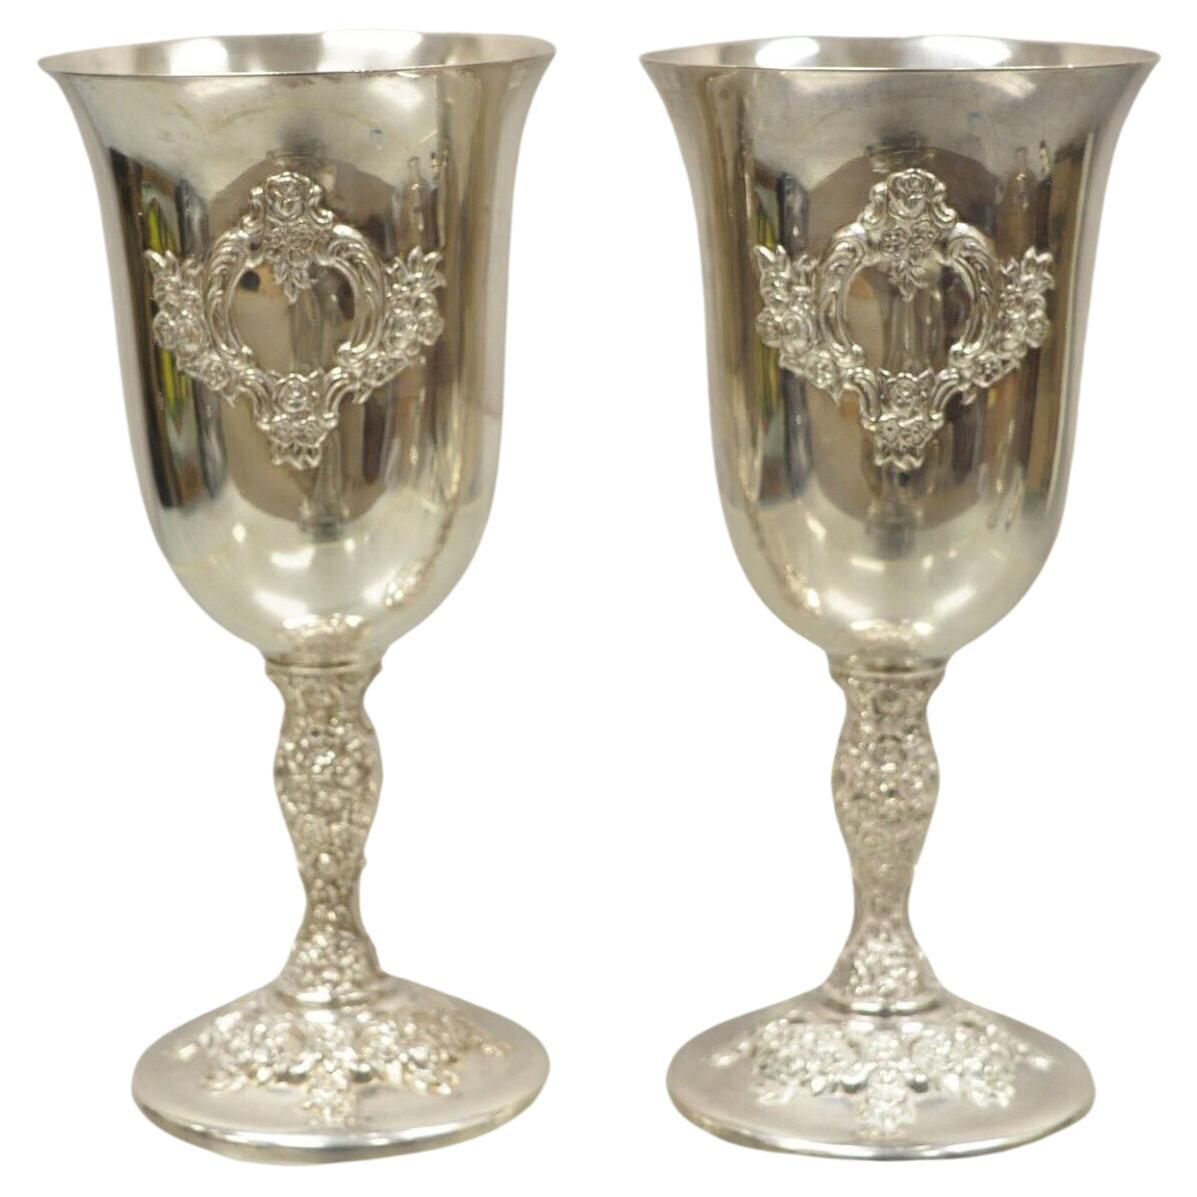 International Silver Du Barry 7995 Silver Plated Wine Goblet Cups, a Pair